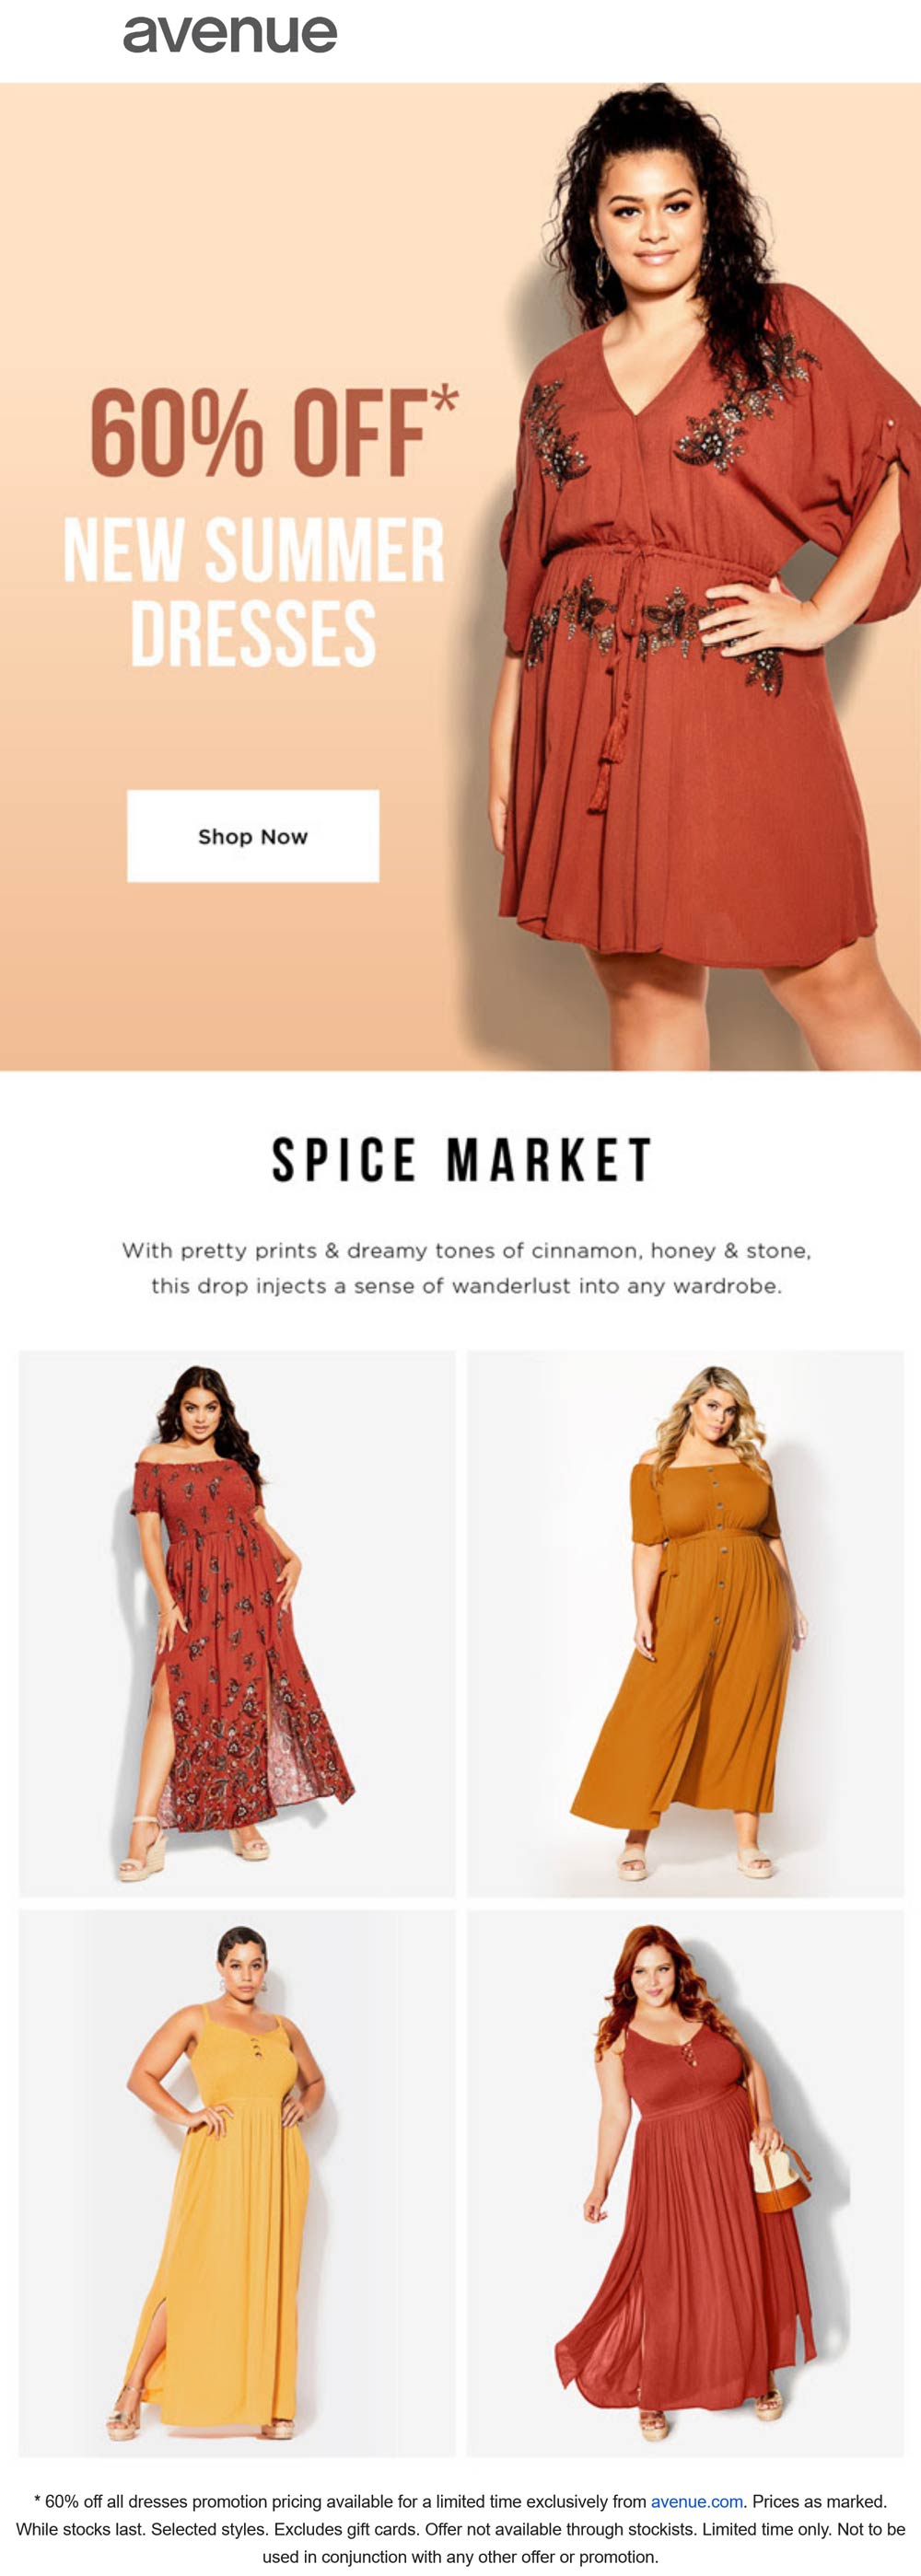 Avenue stores Coupon  60% off all dresses at Avenue #avenue 